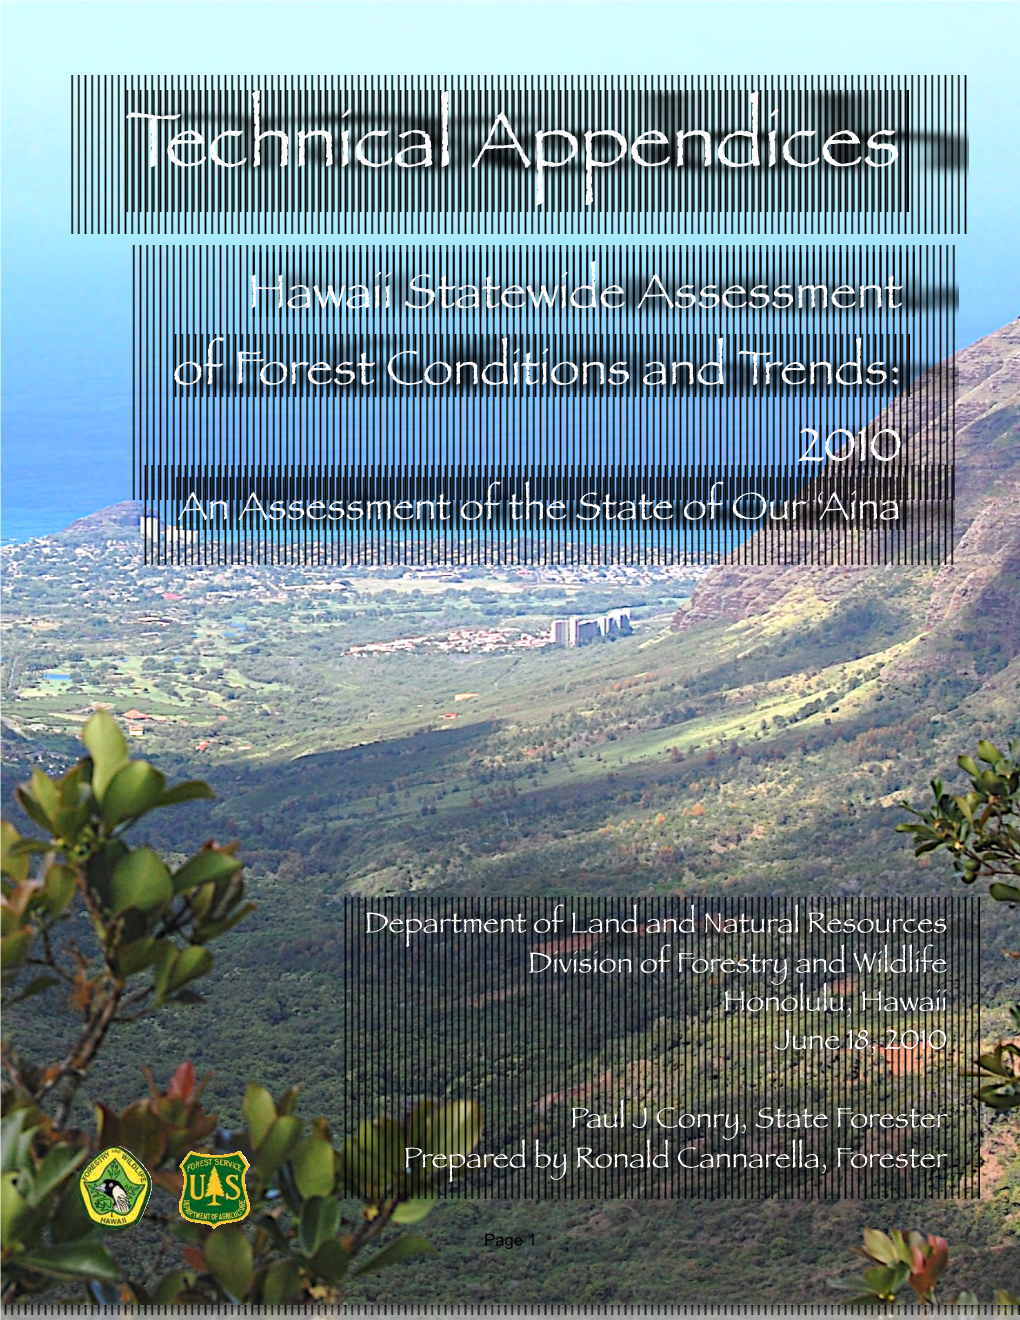 Technical Appendices to Hawaii Statewide Assessment of Forest Conditions and Resource Strategy